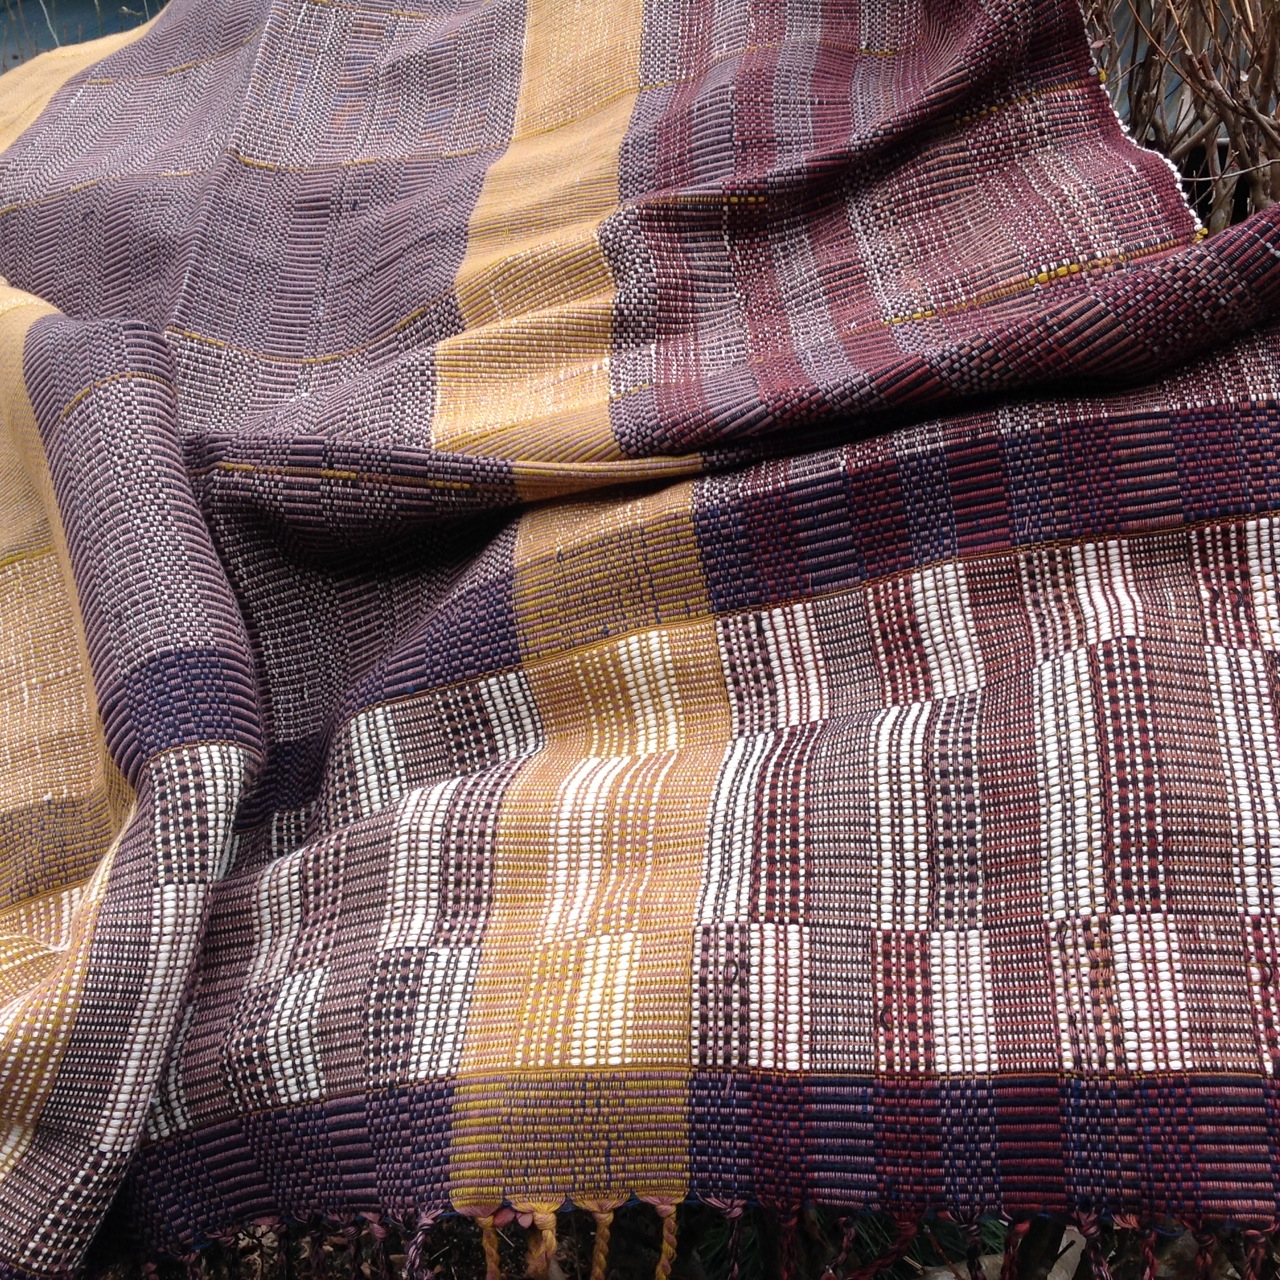 A Textile a Day: Weaving from Sri Lanka